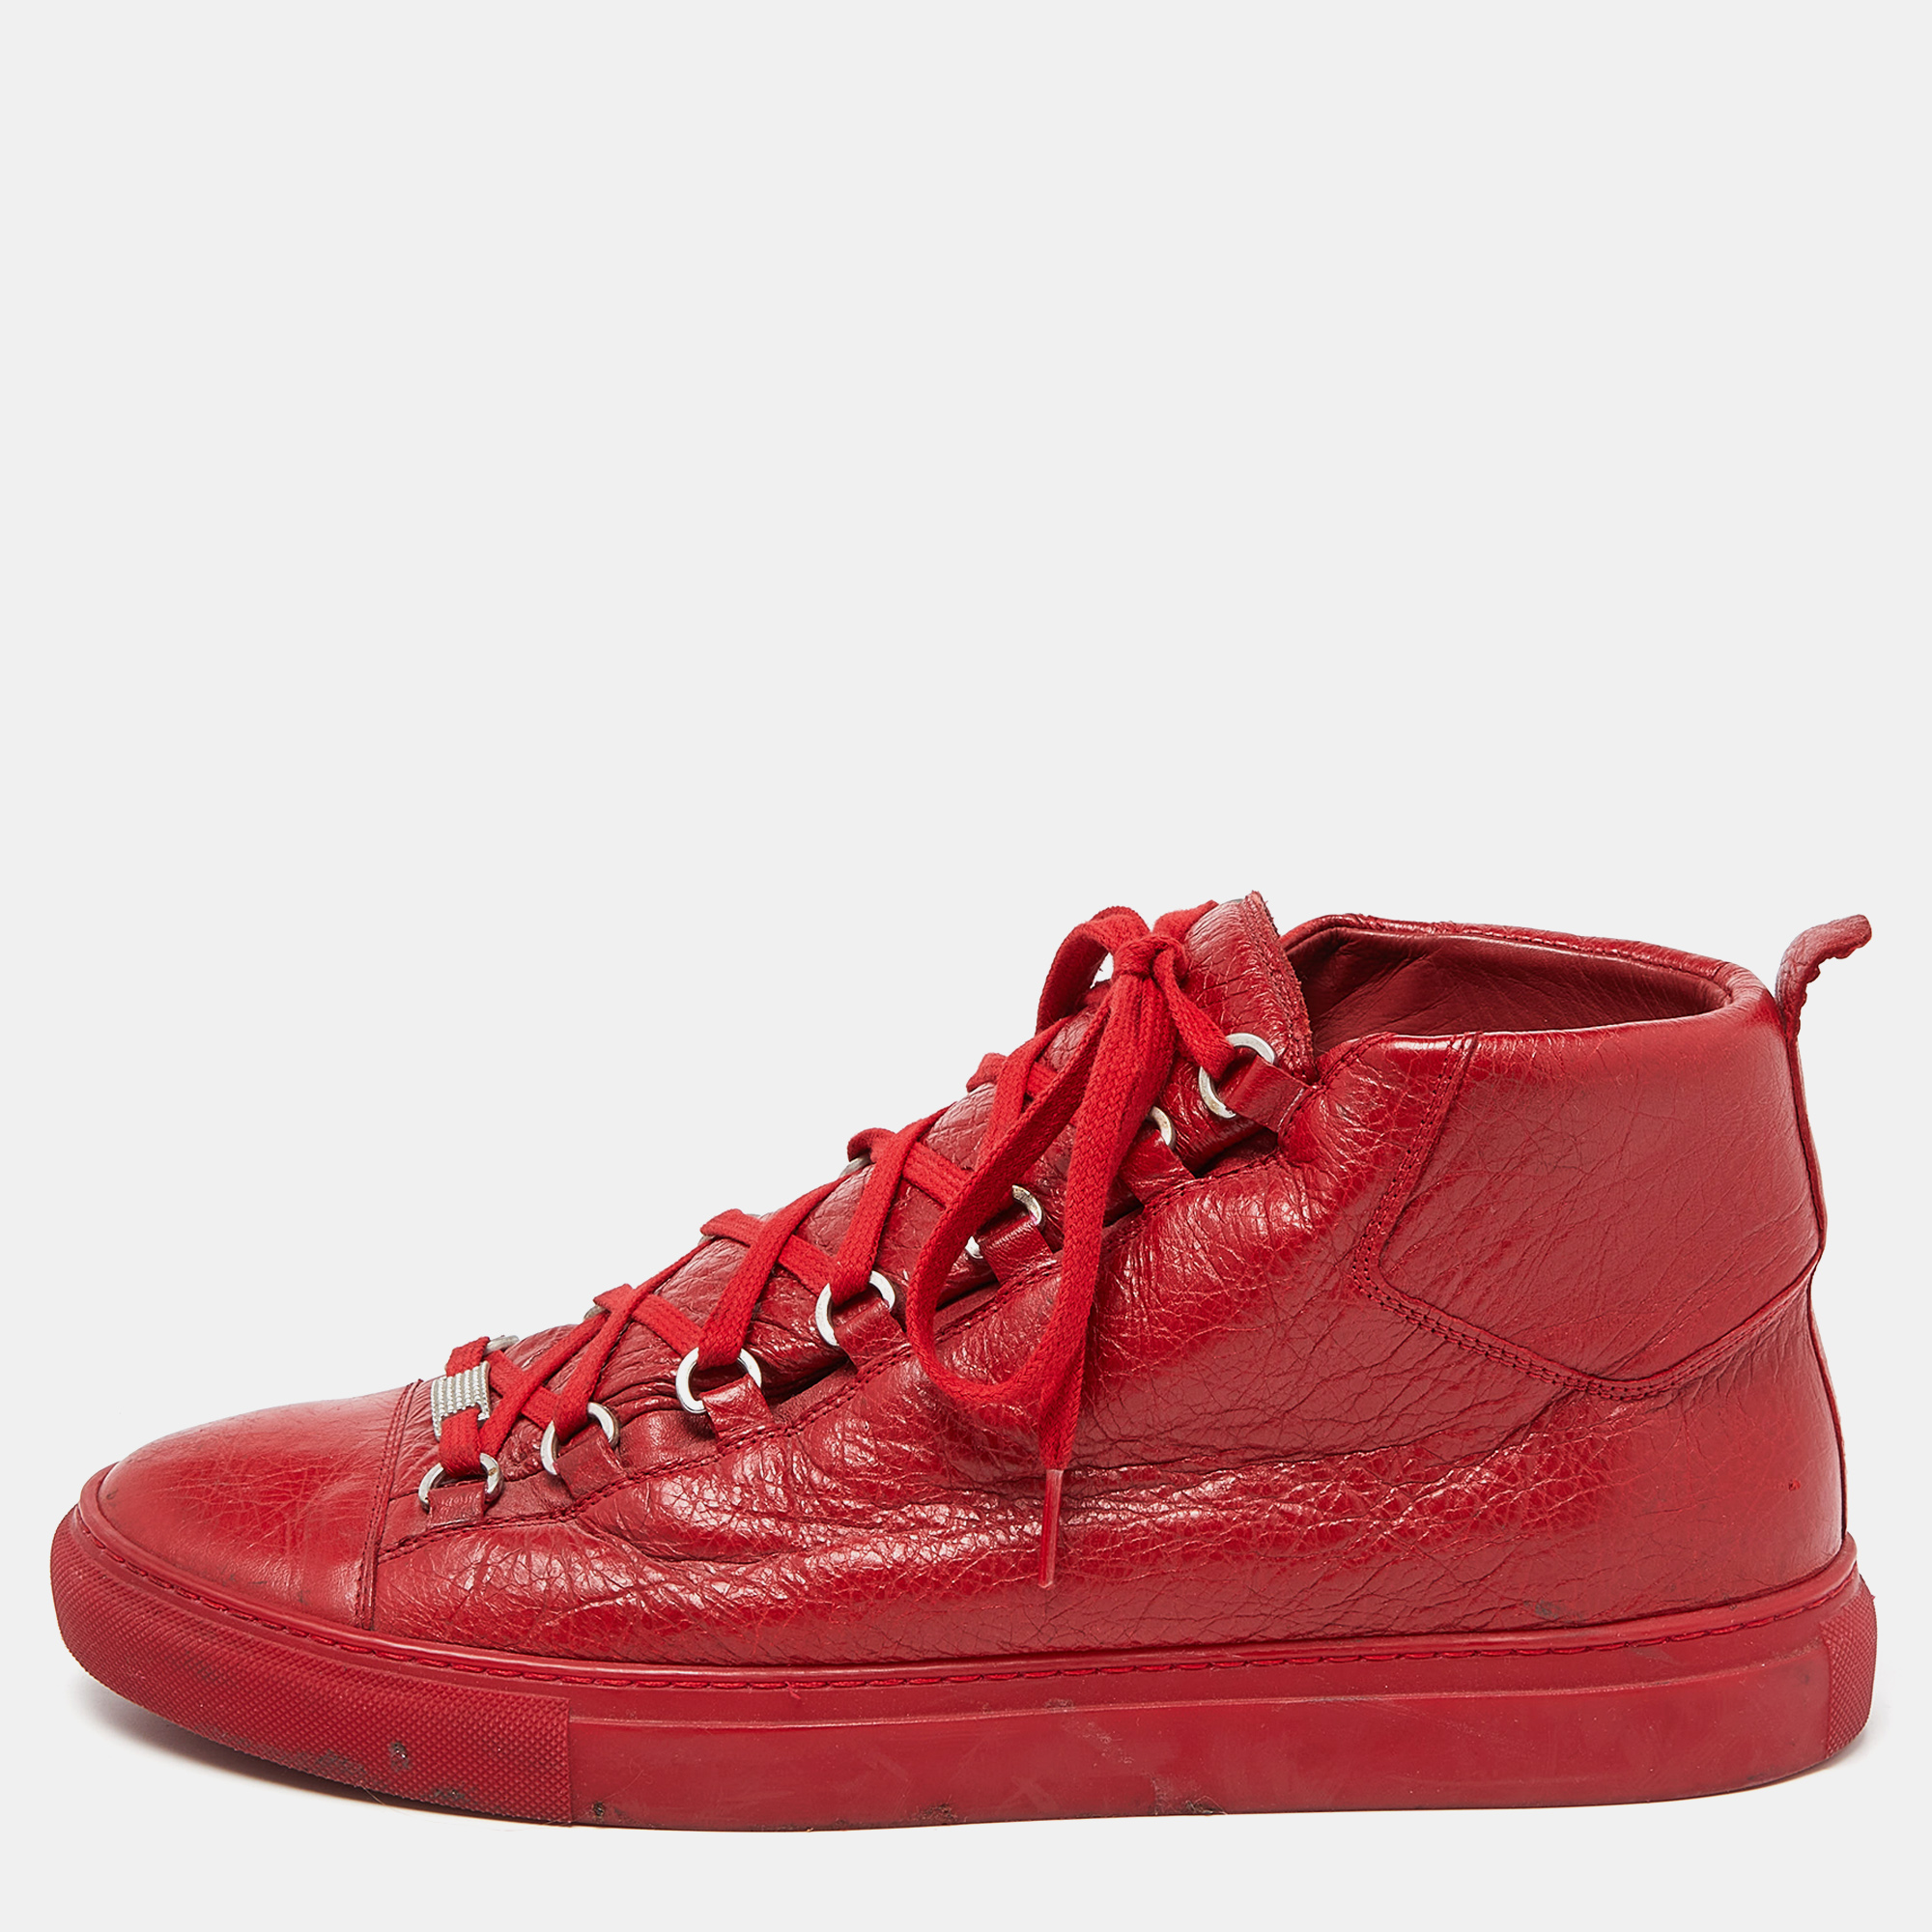 

Balenciaga Red Textured Leather Arena High Top Sneakers Size